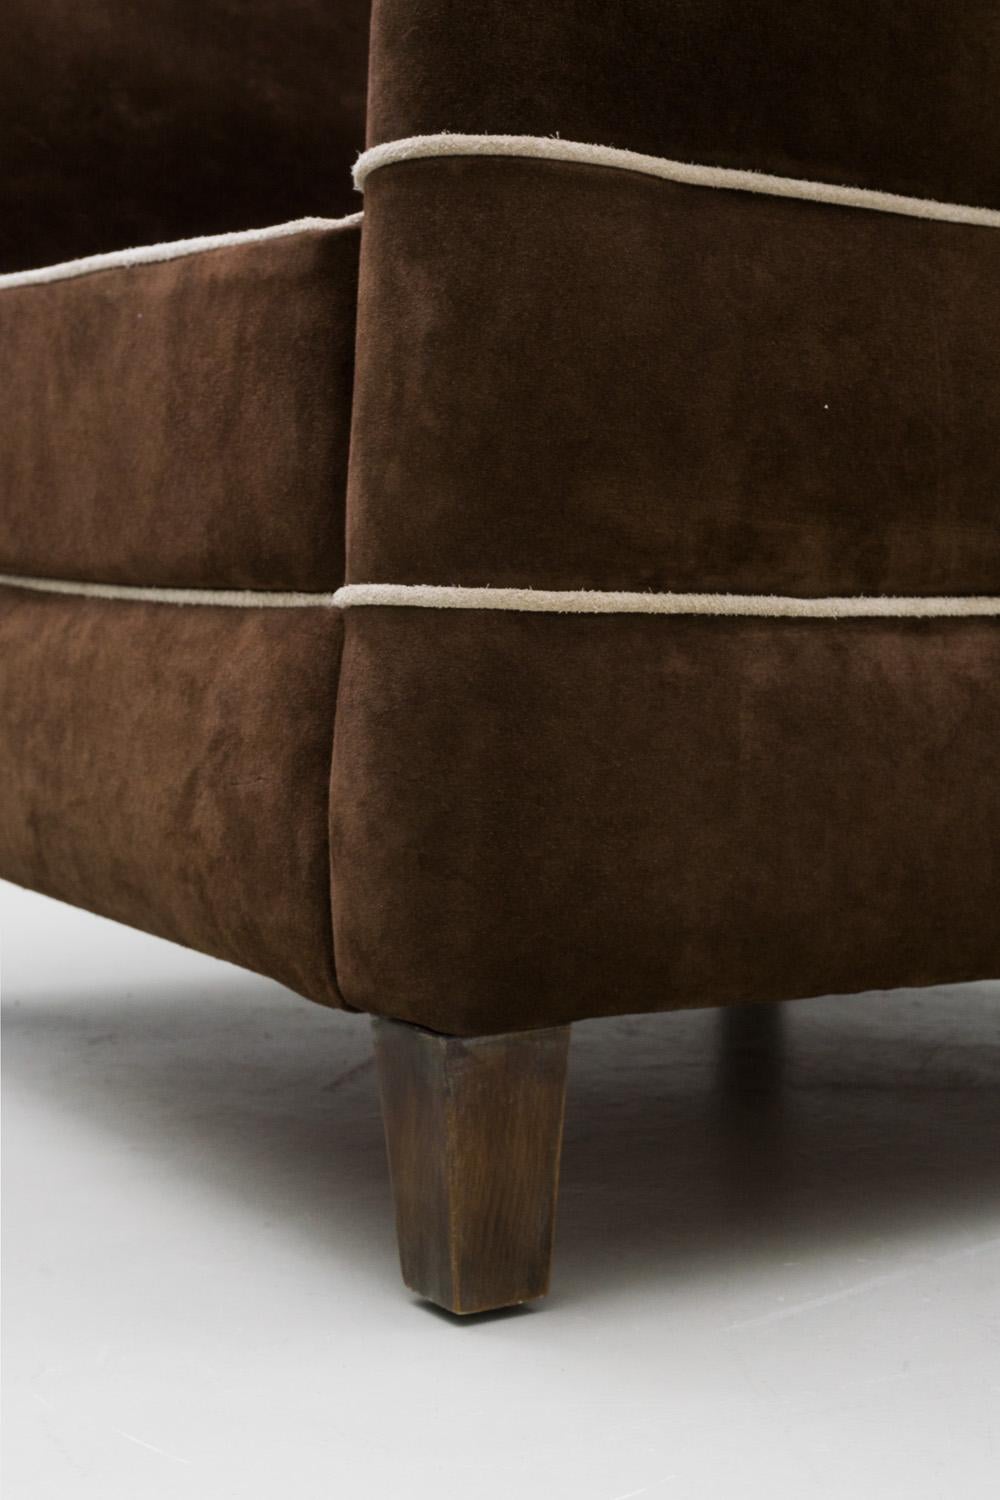 Pair of Brown Suede Armchairs, Guglielmo Ulrich, 1936 For Sale 7